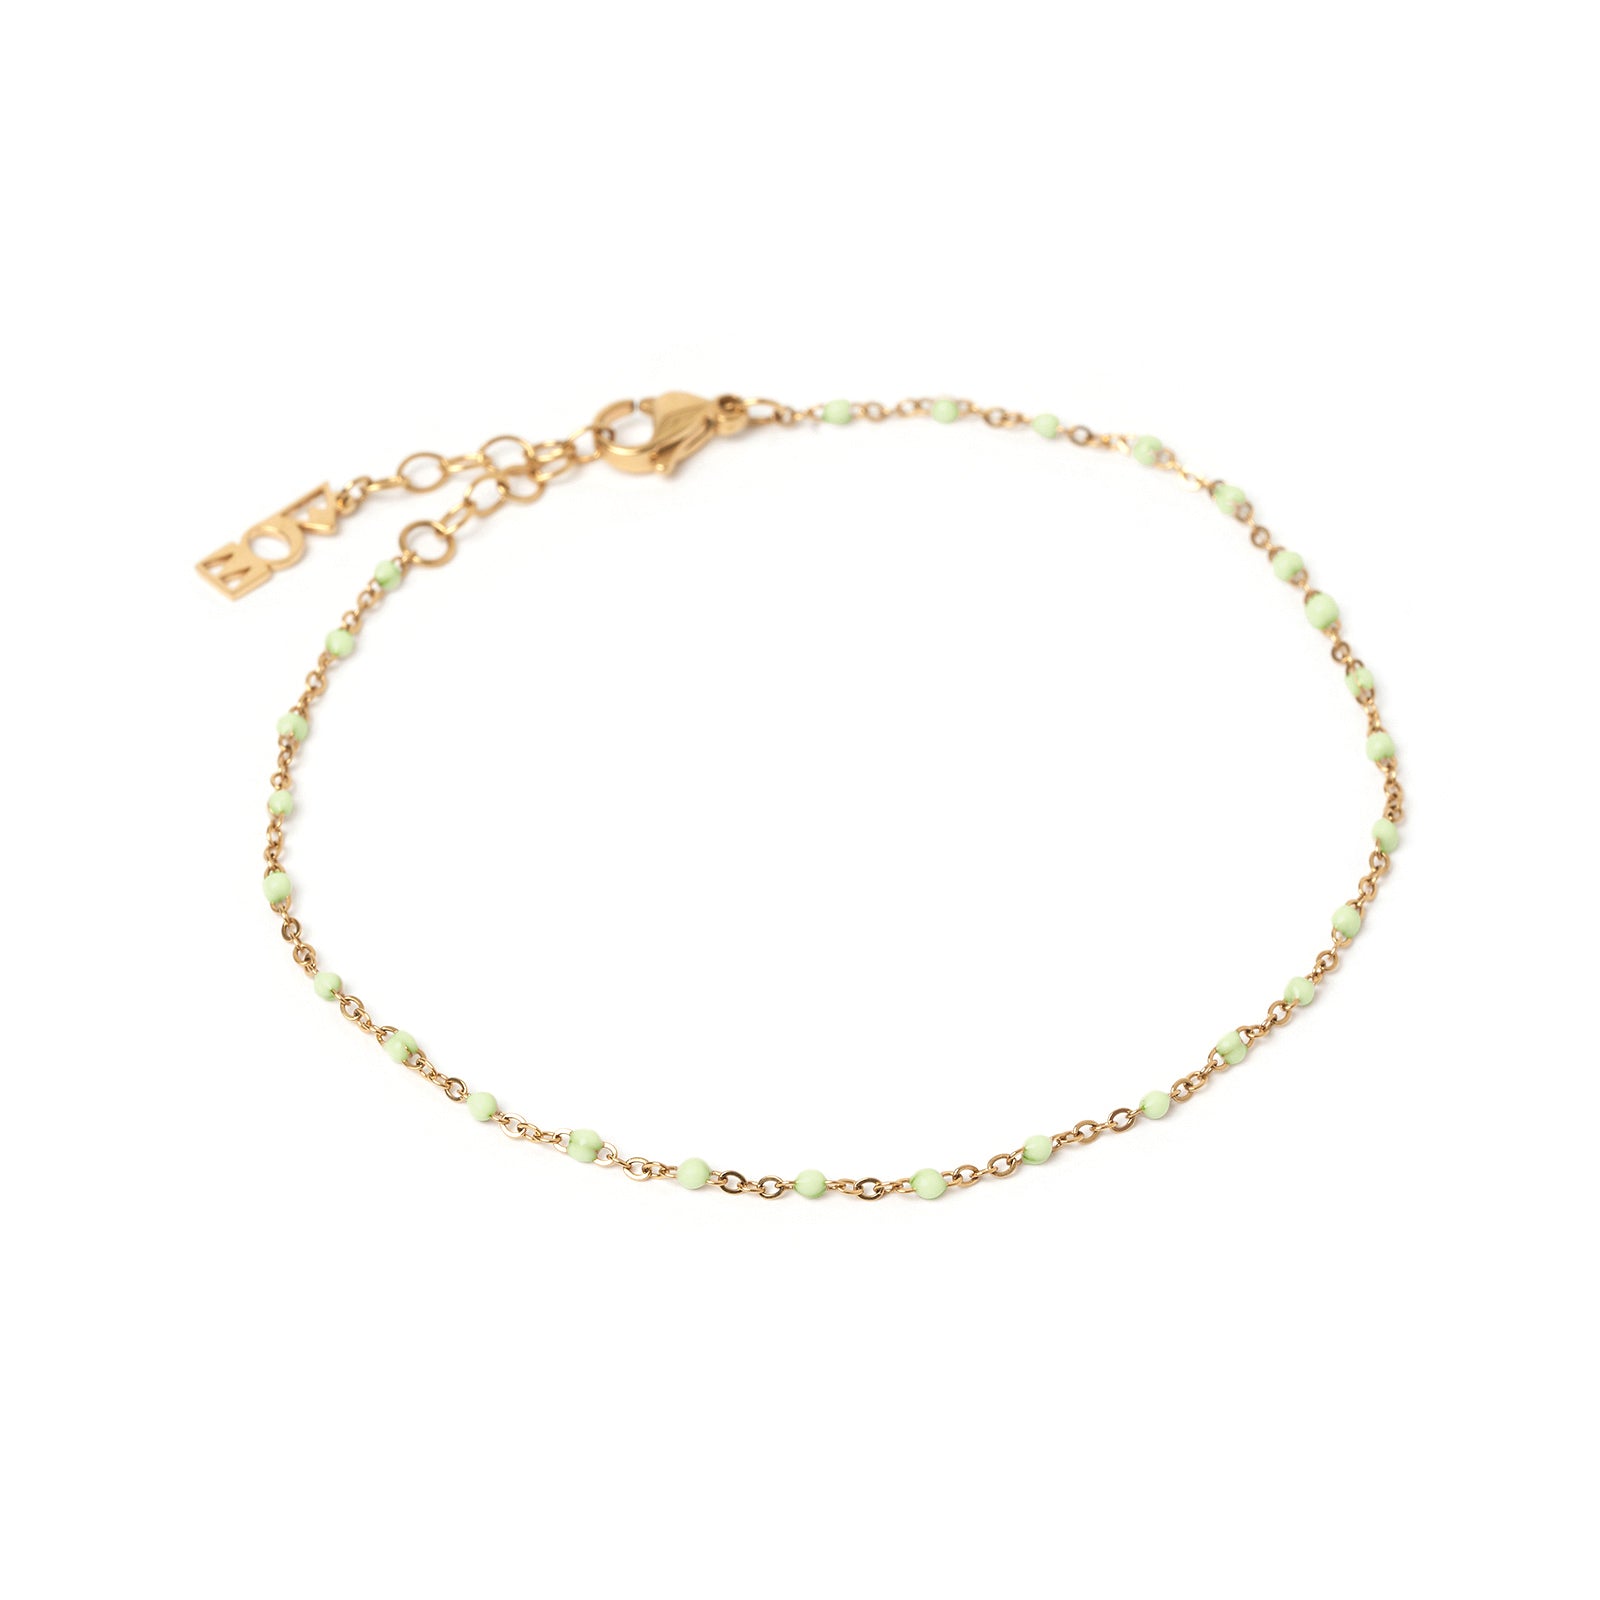 Peggy Gold and Enamel Anklet - Mint